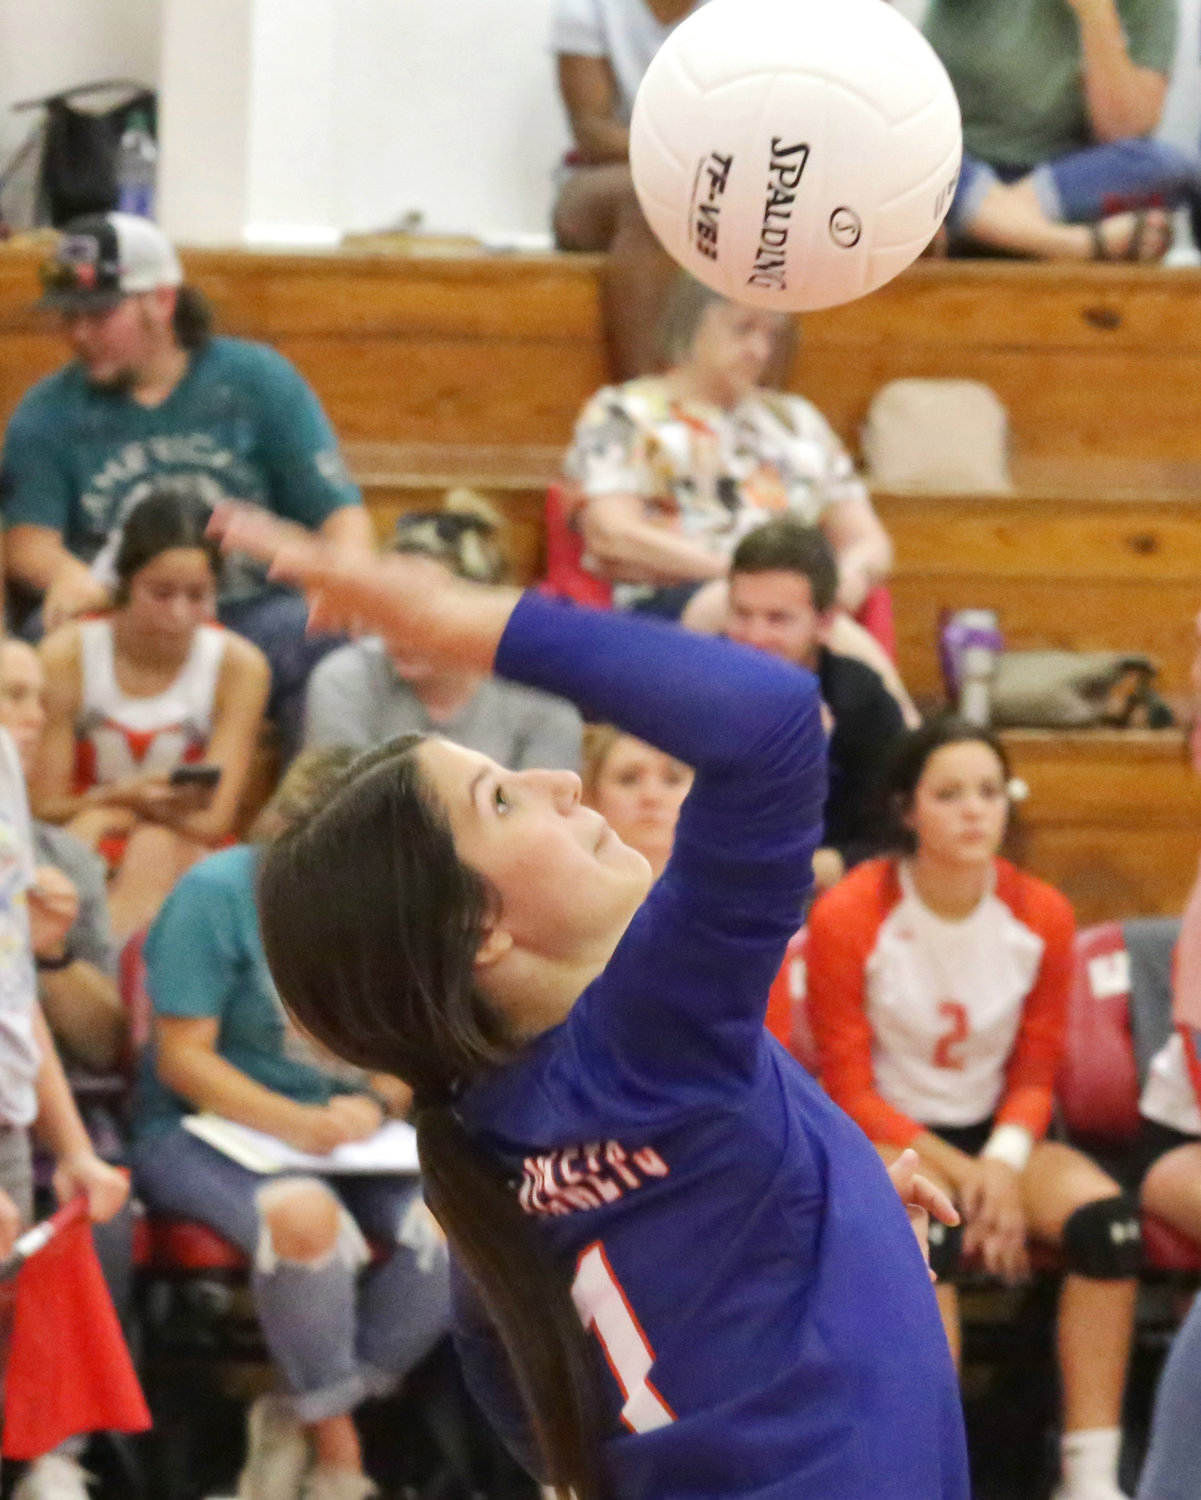 Mineola's Kenleigh Aguirre's service skill played a big role in Mineola's attack.